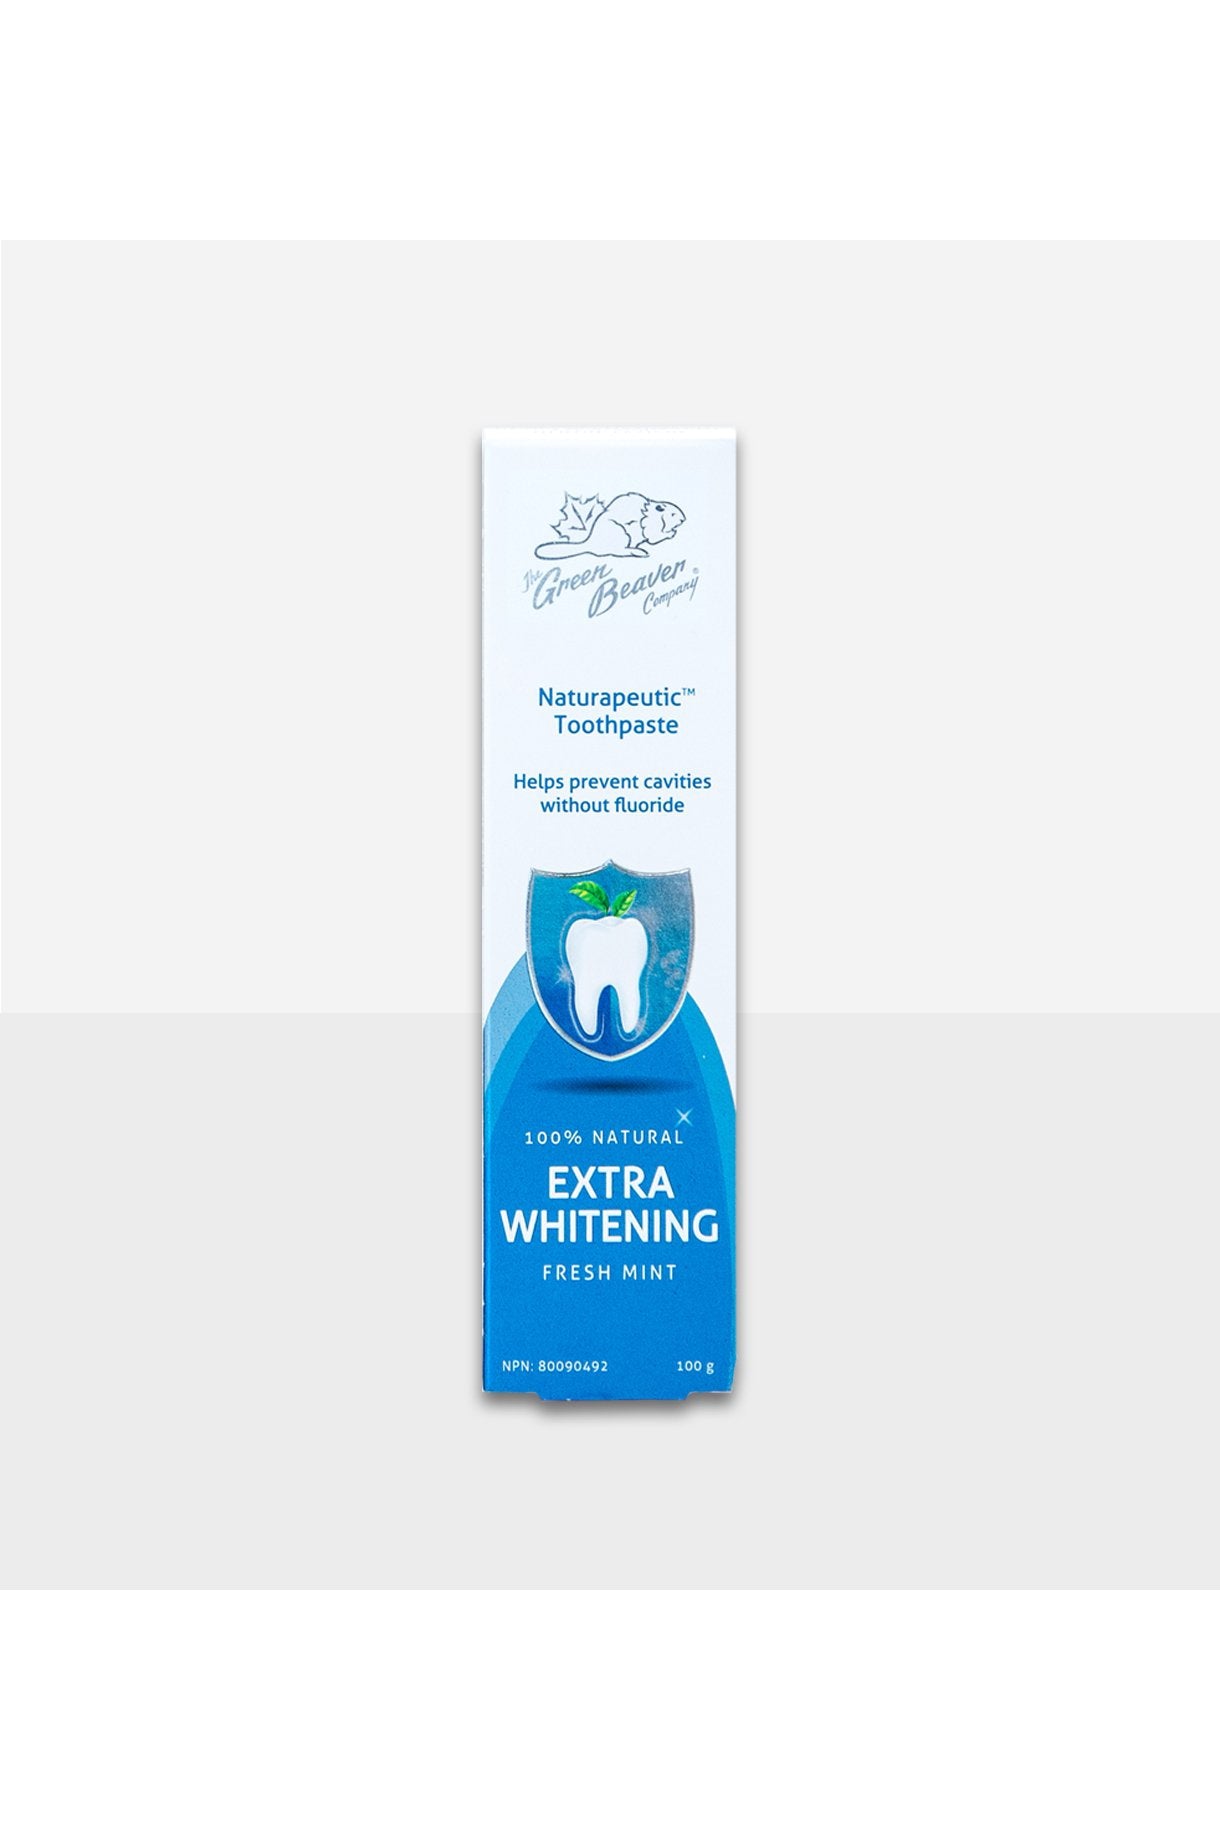 Green Beaver Naturapeutic Extra Whitening Toothpaste - Fresh Mint Flavour 100g